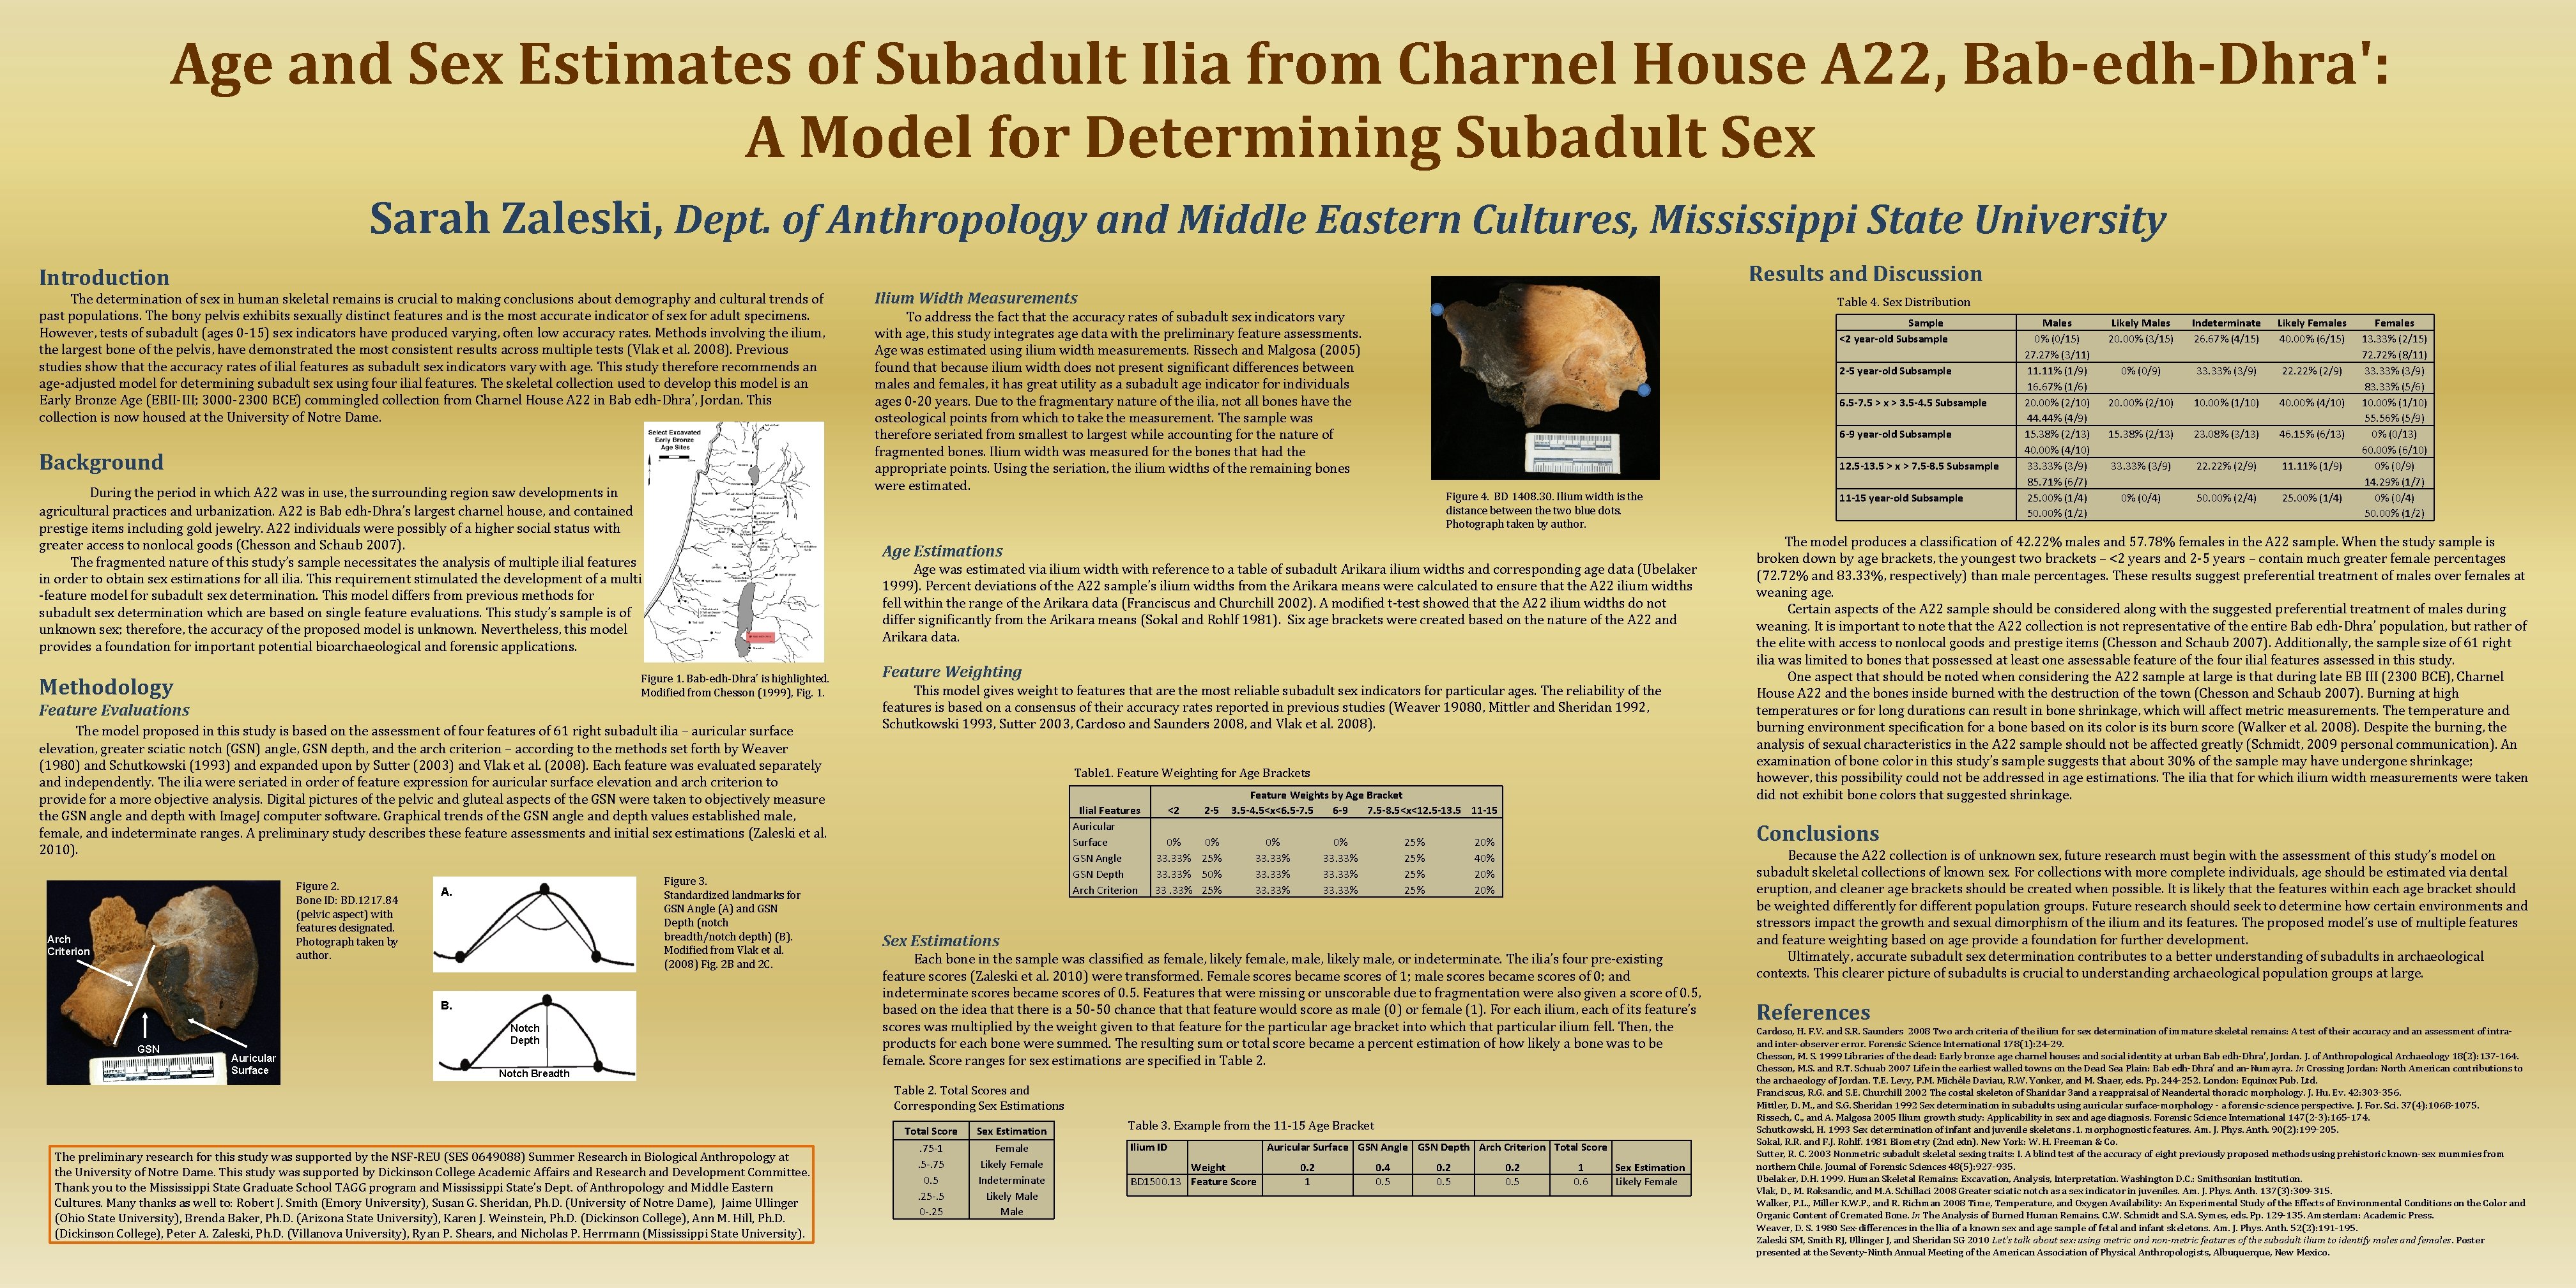 Age and Sex Estimates of Subadult Ilia from Charnel House A 22, Bab-edh-Dhra': A